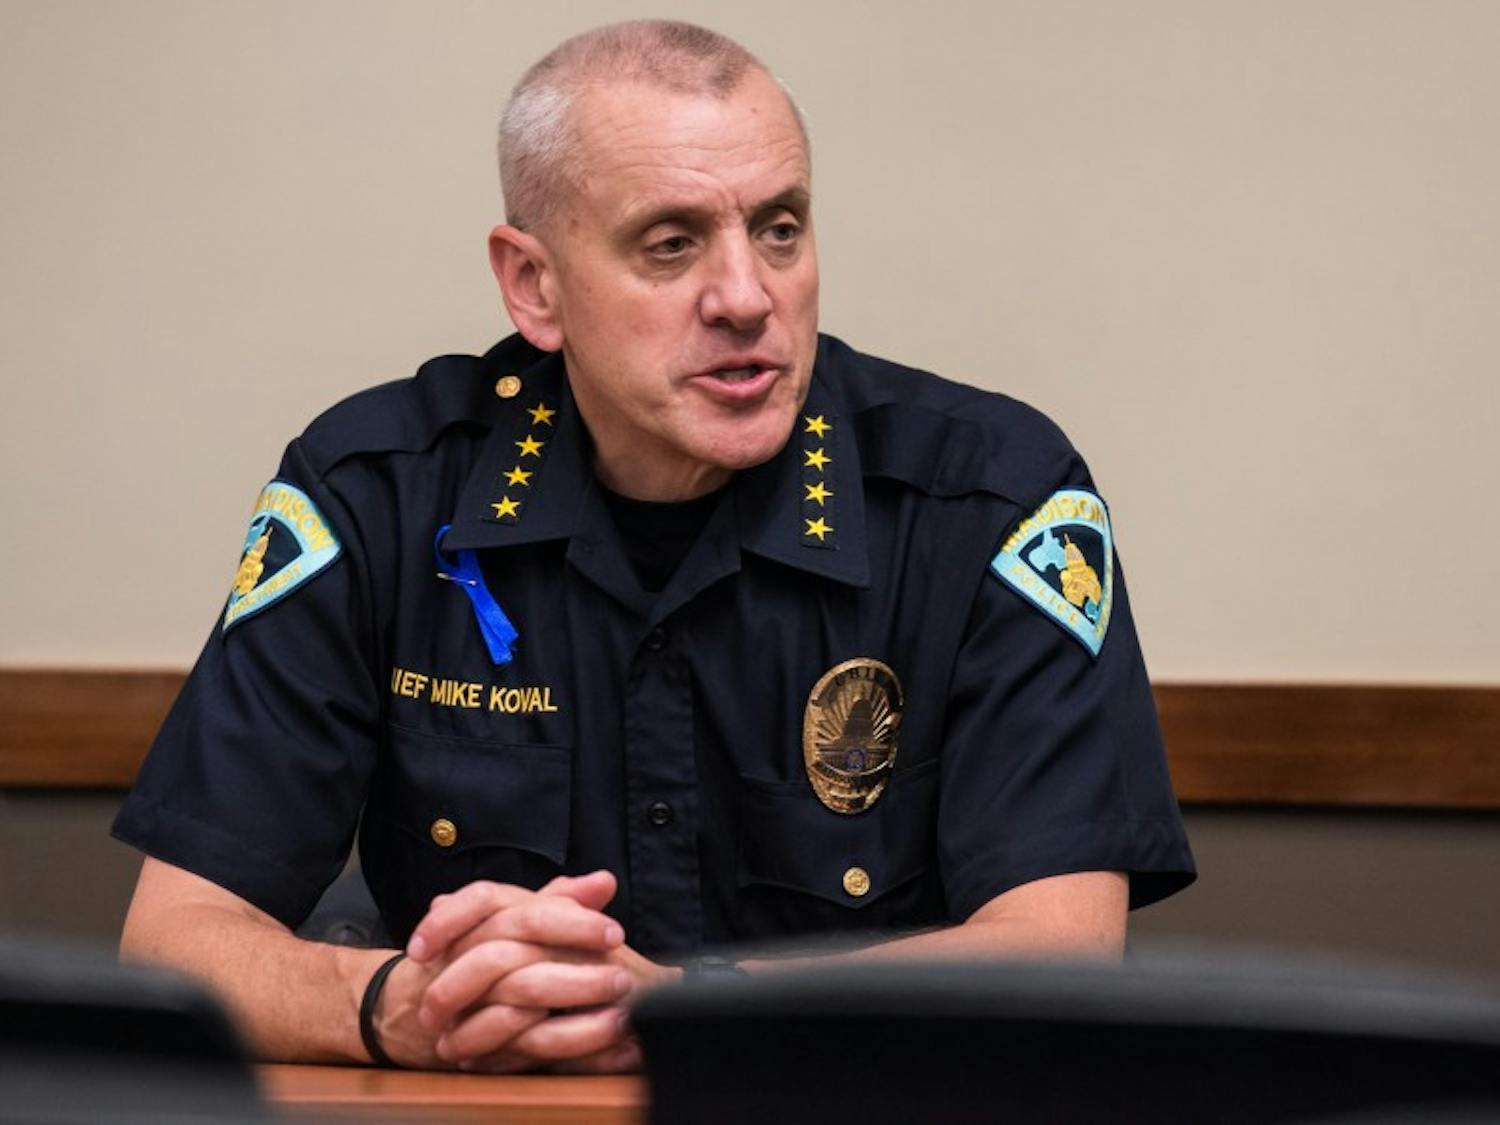 In 2015, Madison Police Department Chief Mike Koval called&nbsp;for more sworn officers to account for a population increase.&nbsp;